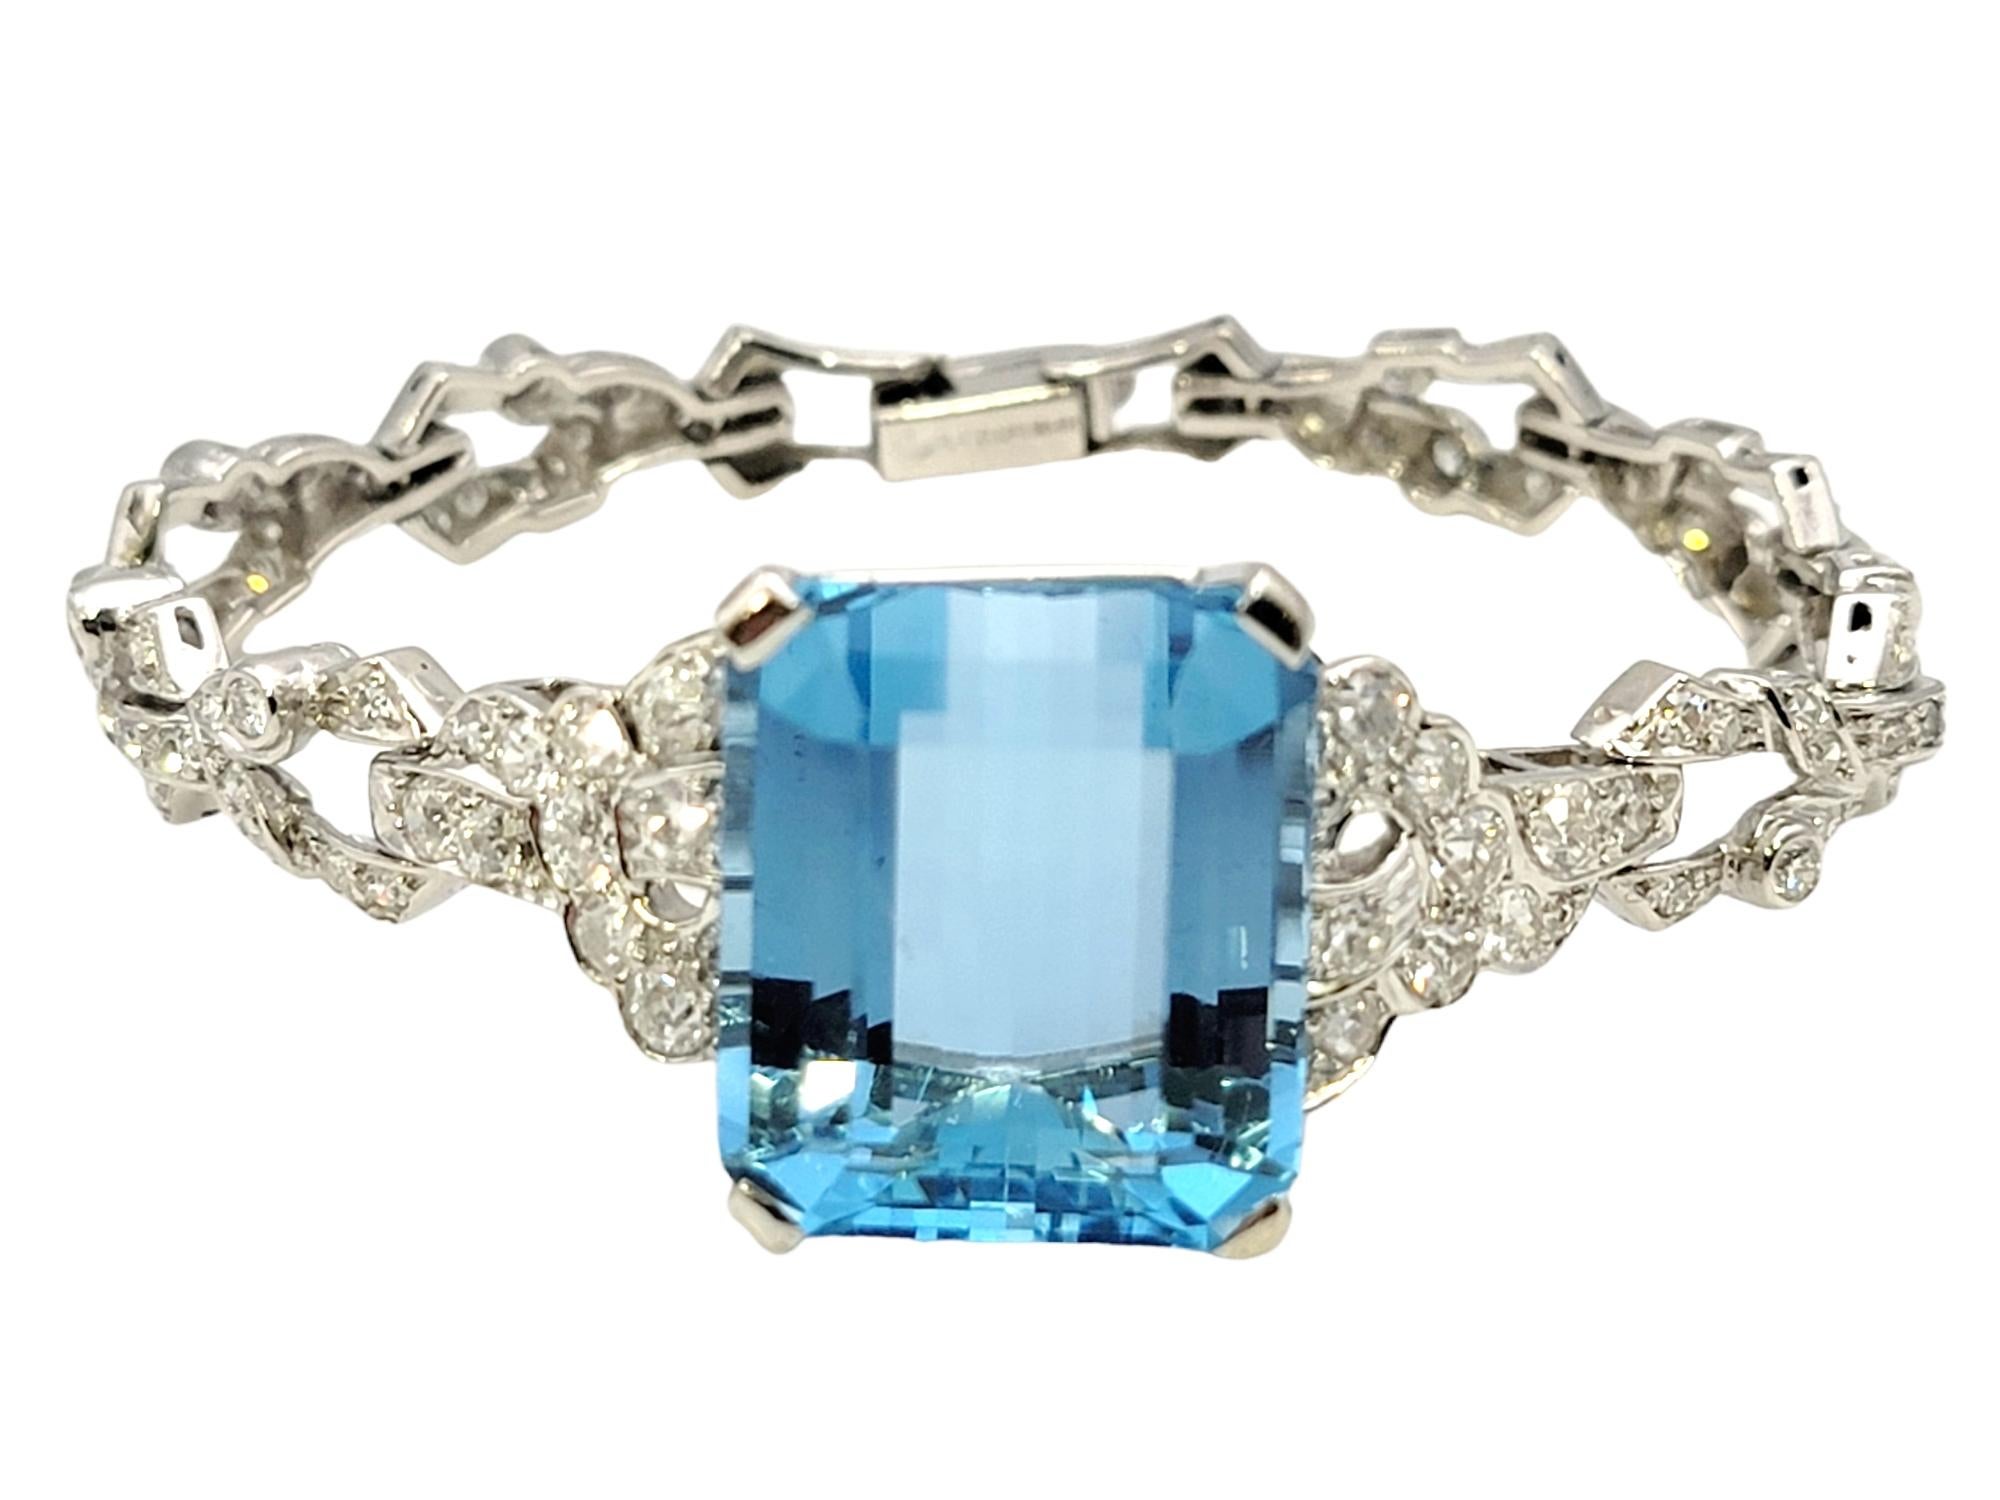 This jaw-dropping, vintage bracelet will absolutely take your breath away. This magnificent piece features a single prong set emerald cut 23.31 carat natural aquamarine stone set at the center of the bracelet.  The impressive colored gemstone is